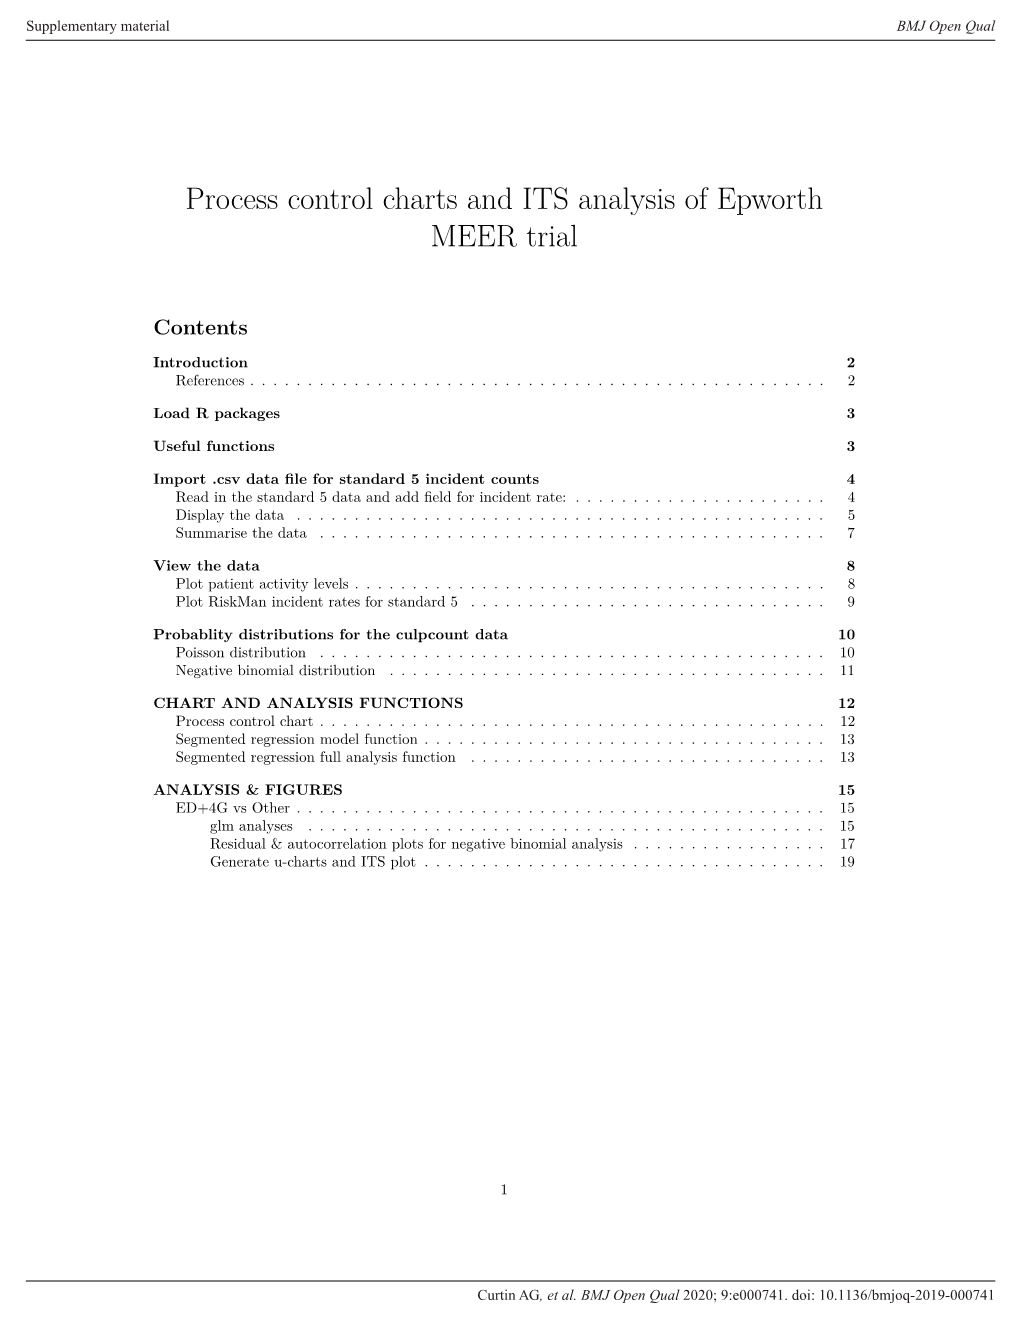 Process Control Charts and ITS Analysis of Epworth MEER Trial